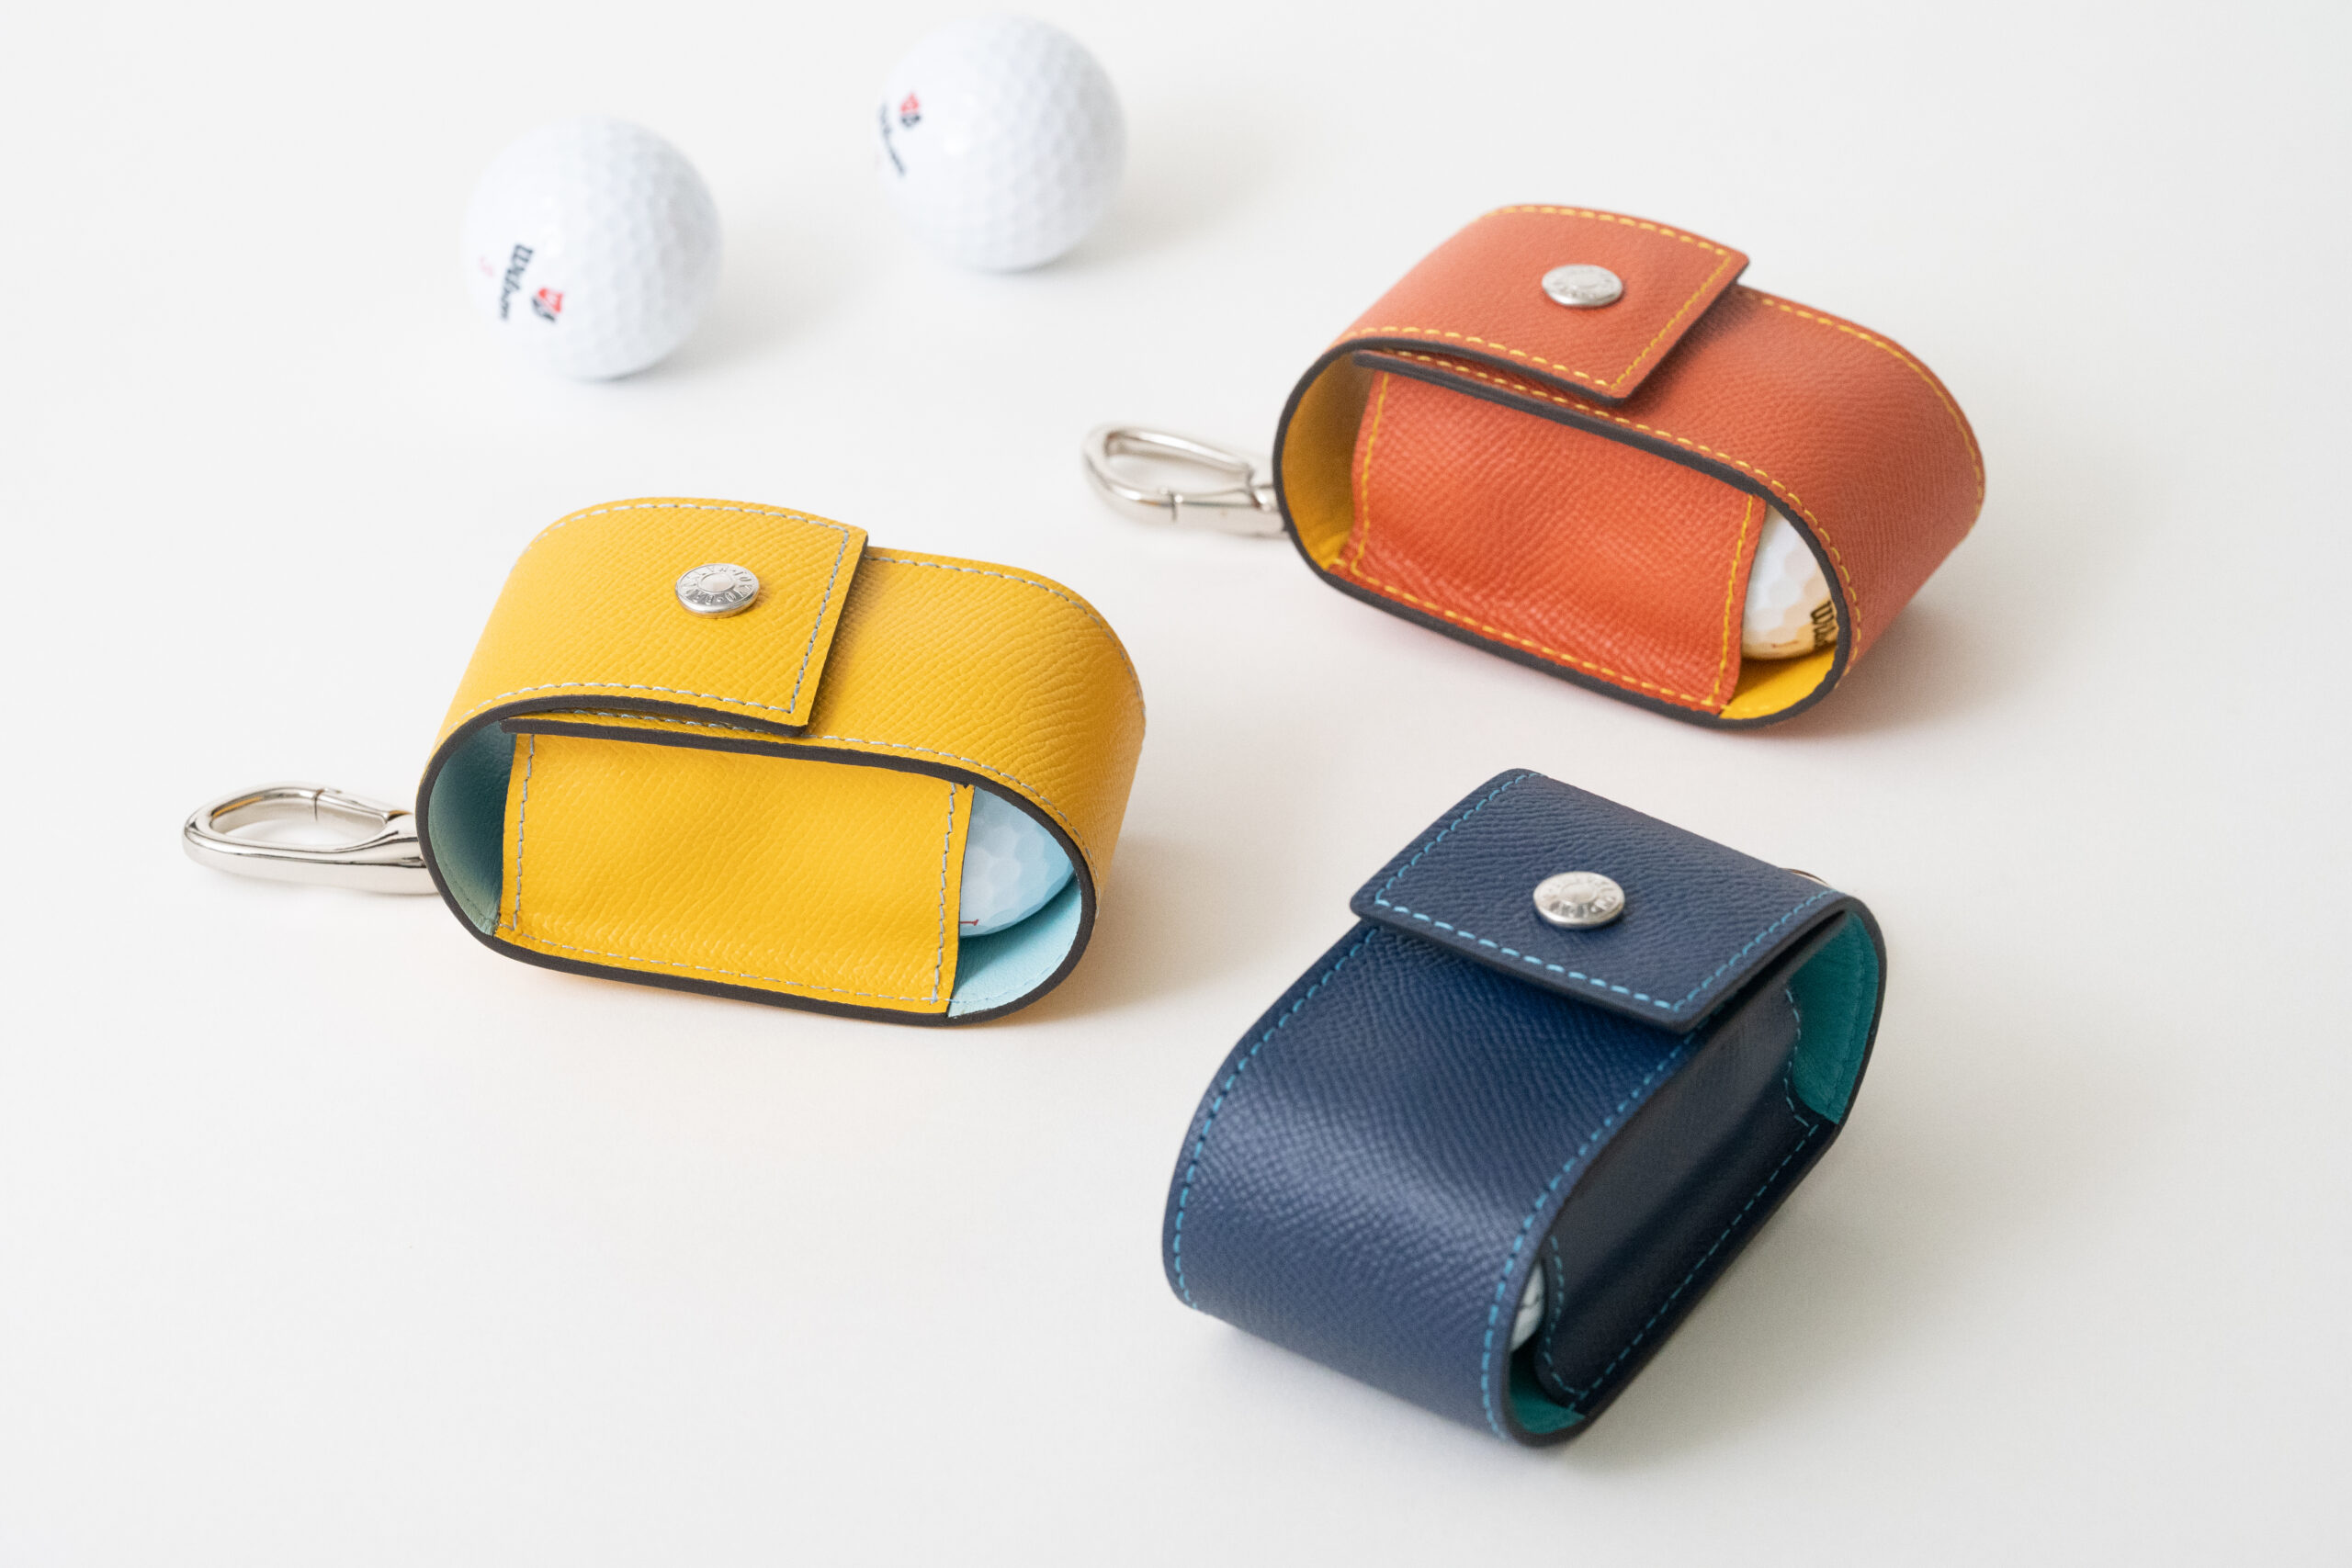 New golf leather pouches - HULS Gallery Singapore | Japanese Crafts